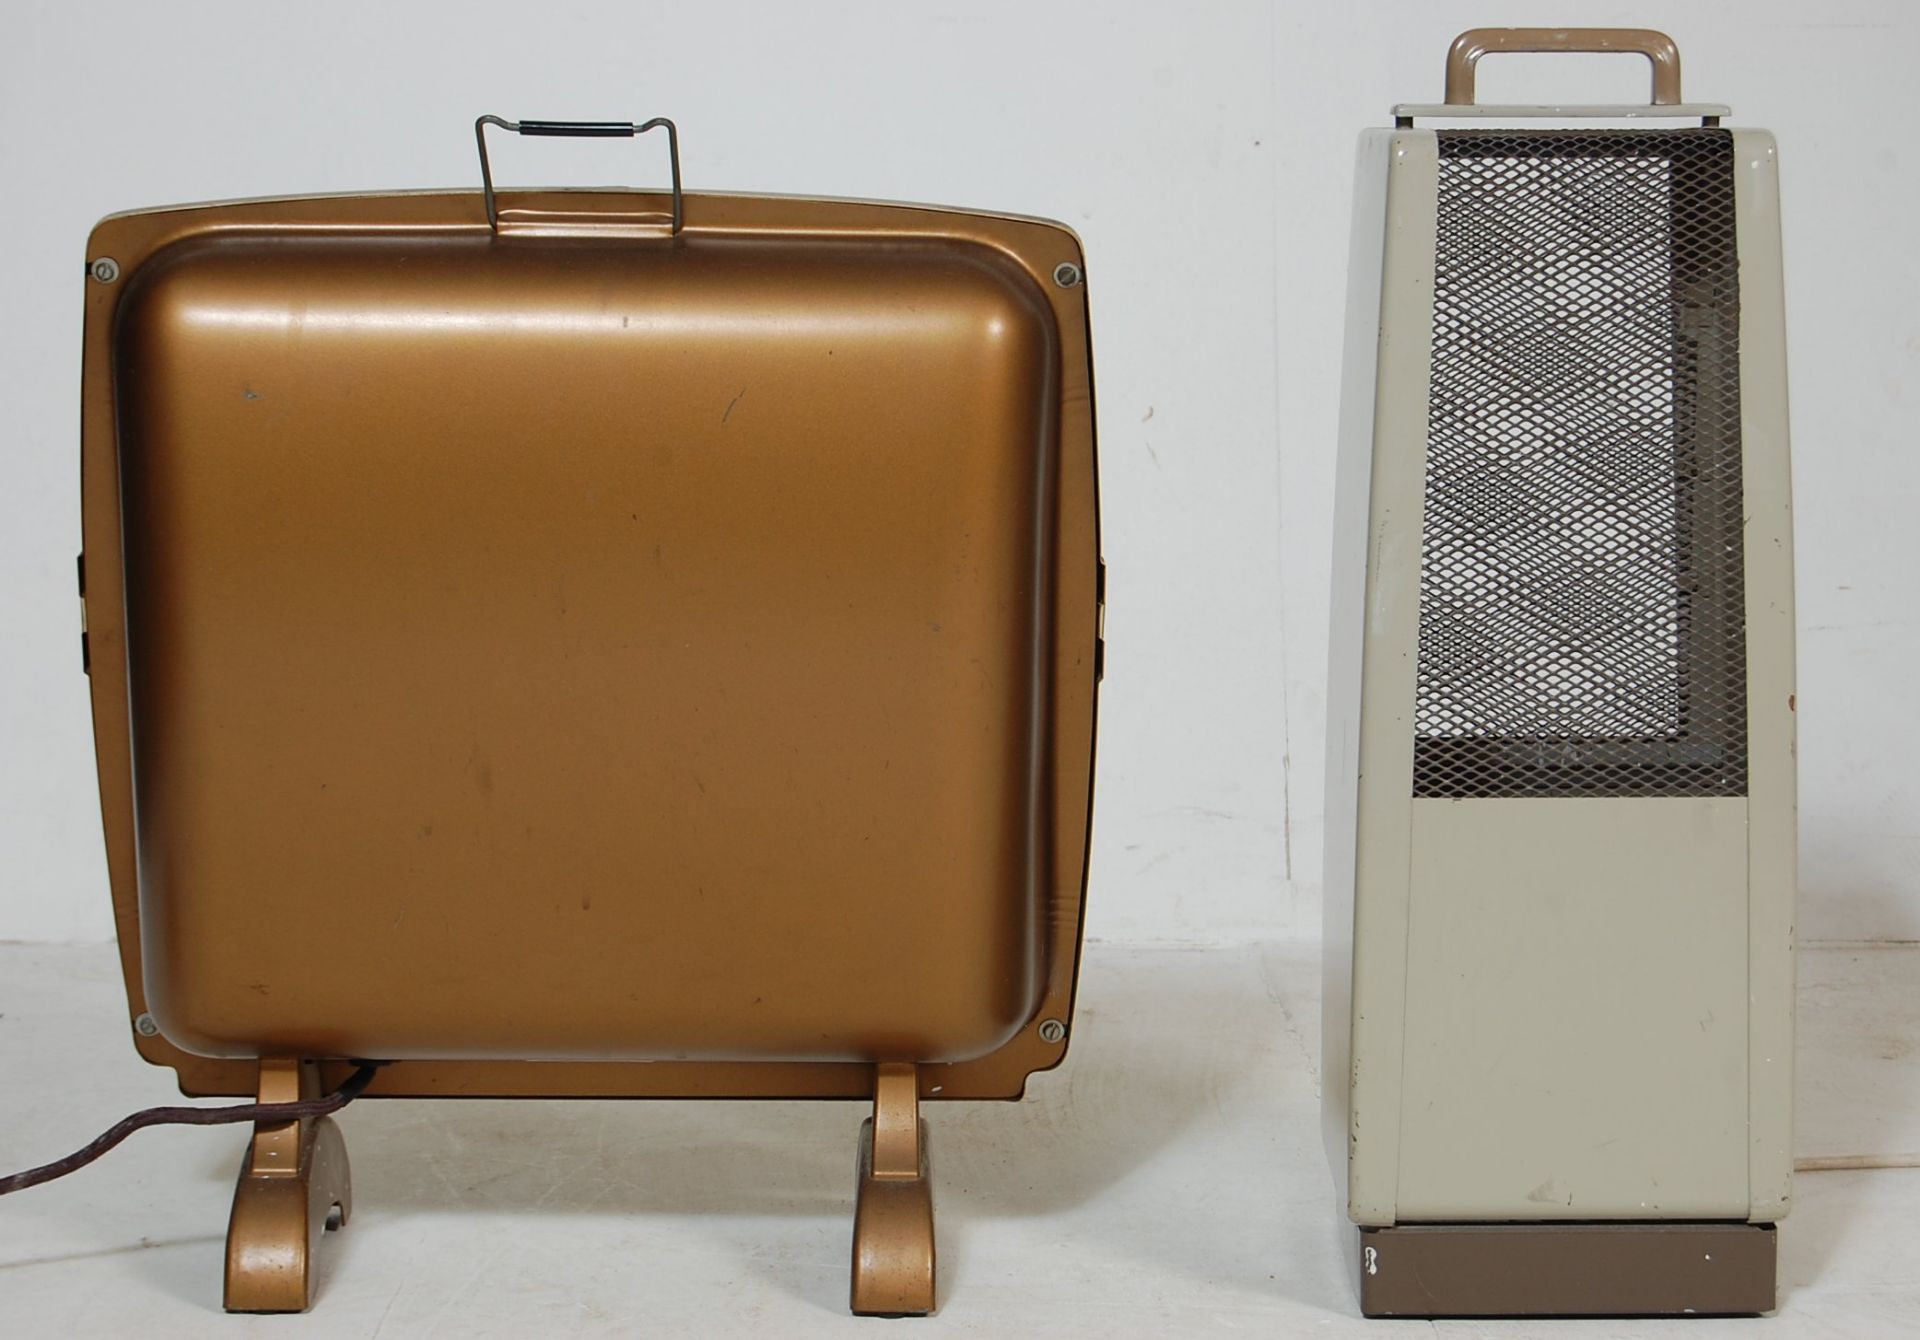 A GROUP OF TWO VINTAGE RETRO MID CENTURY HEATERS FINISHED IN ENAMELLED PAINT - Image 6 of 6